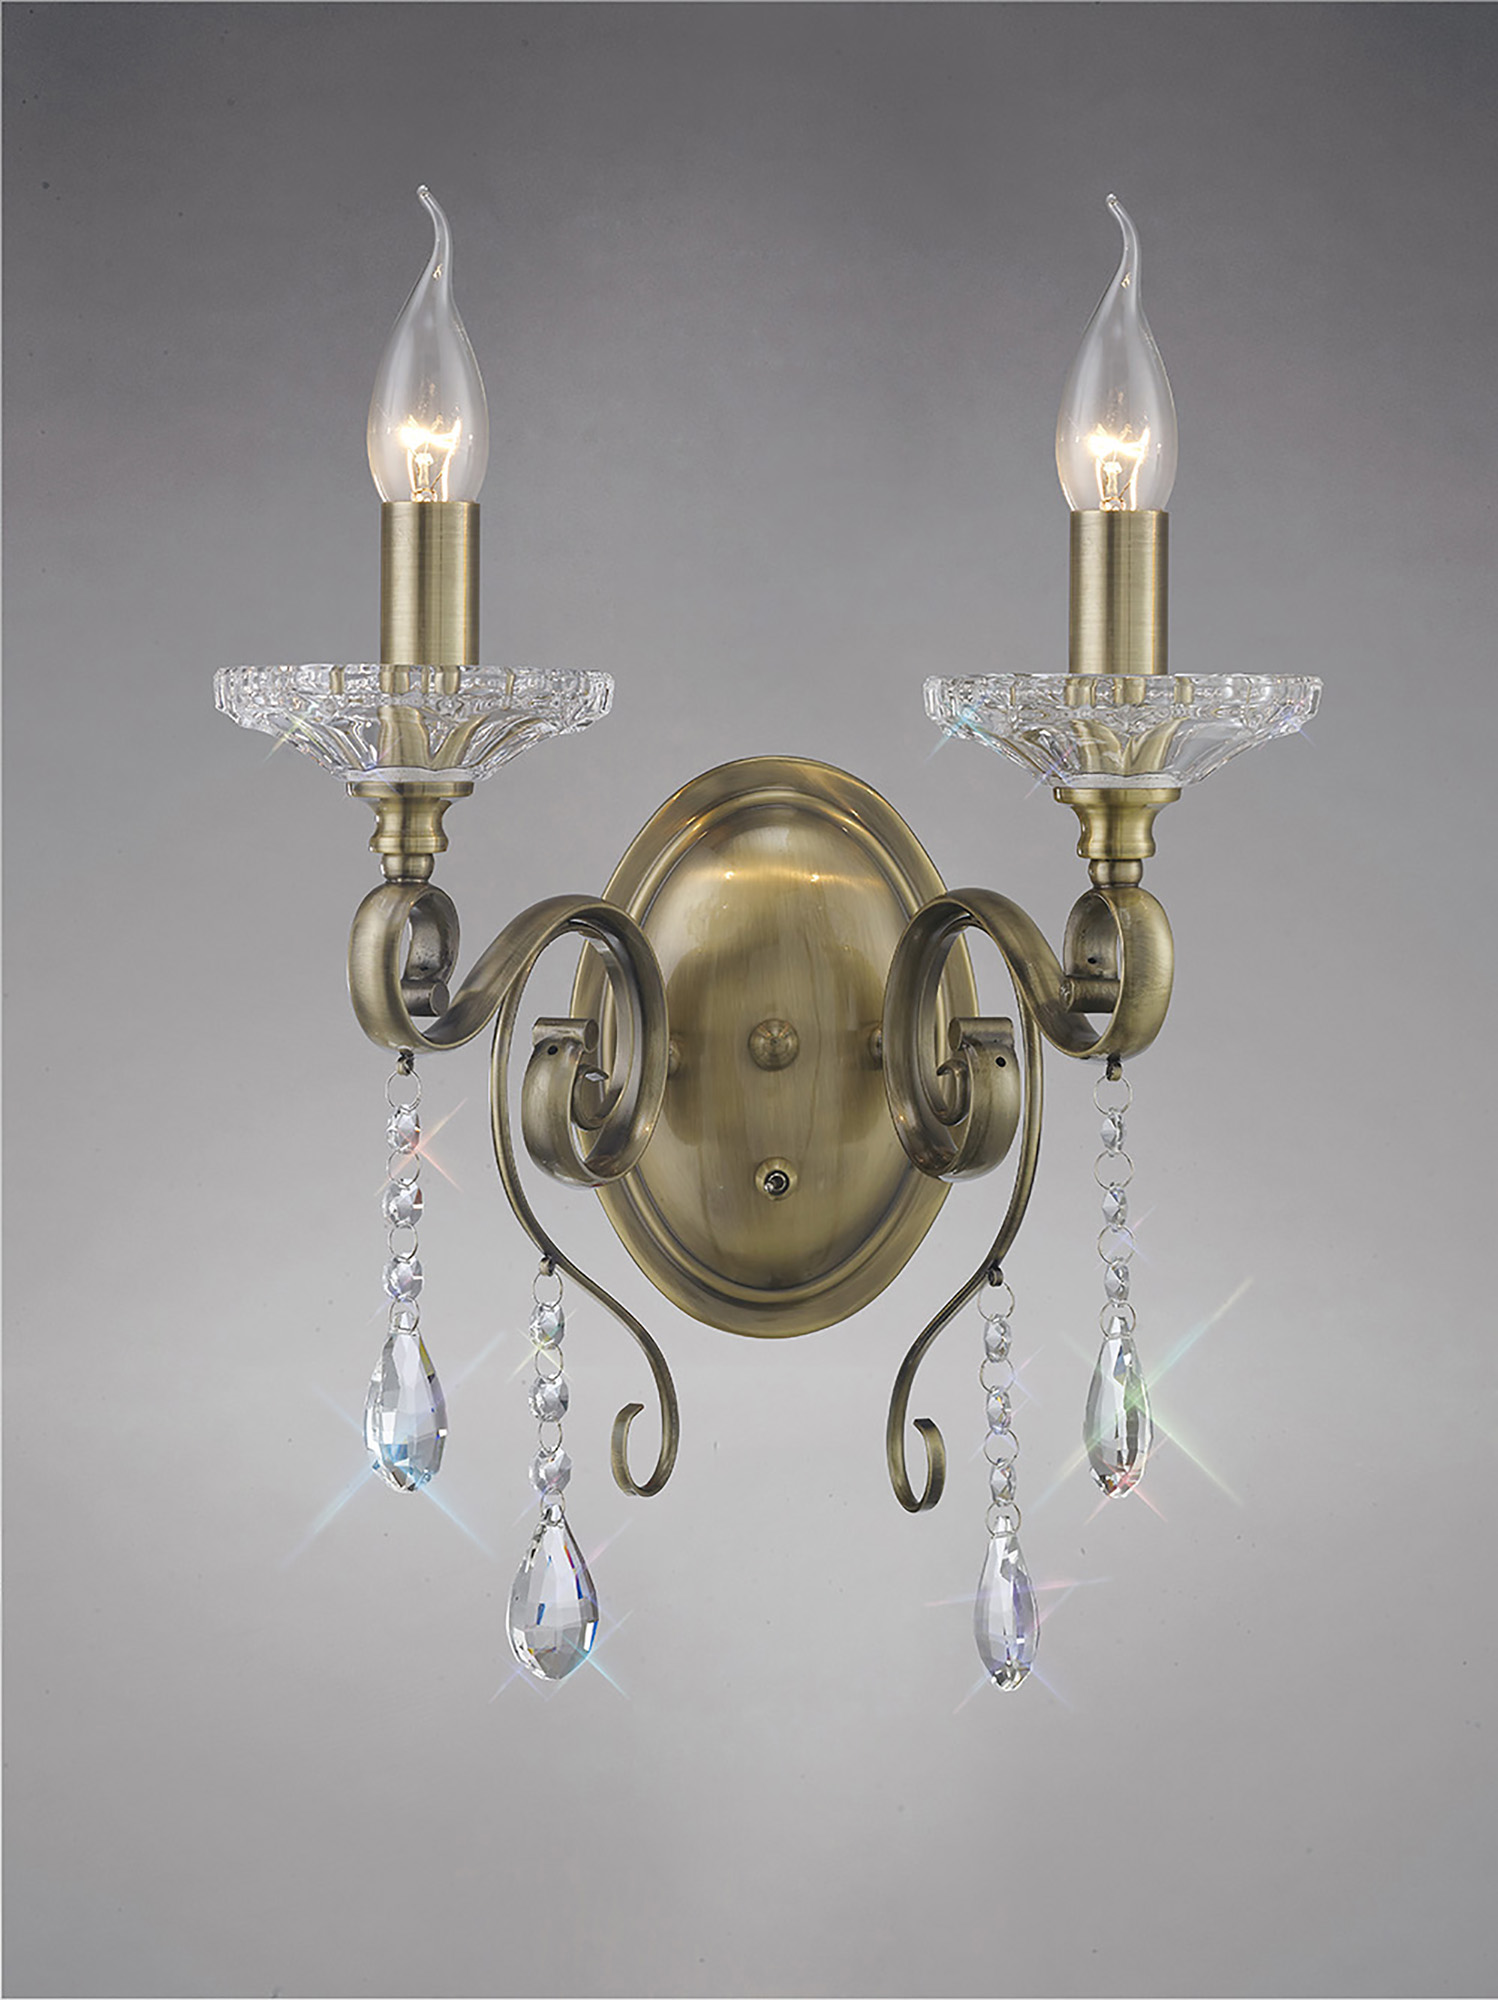 IL32072  Libra Crystal Switched Wall Lamp 2 Light